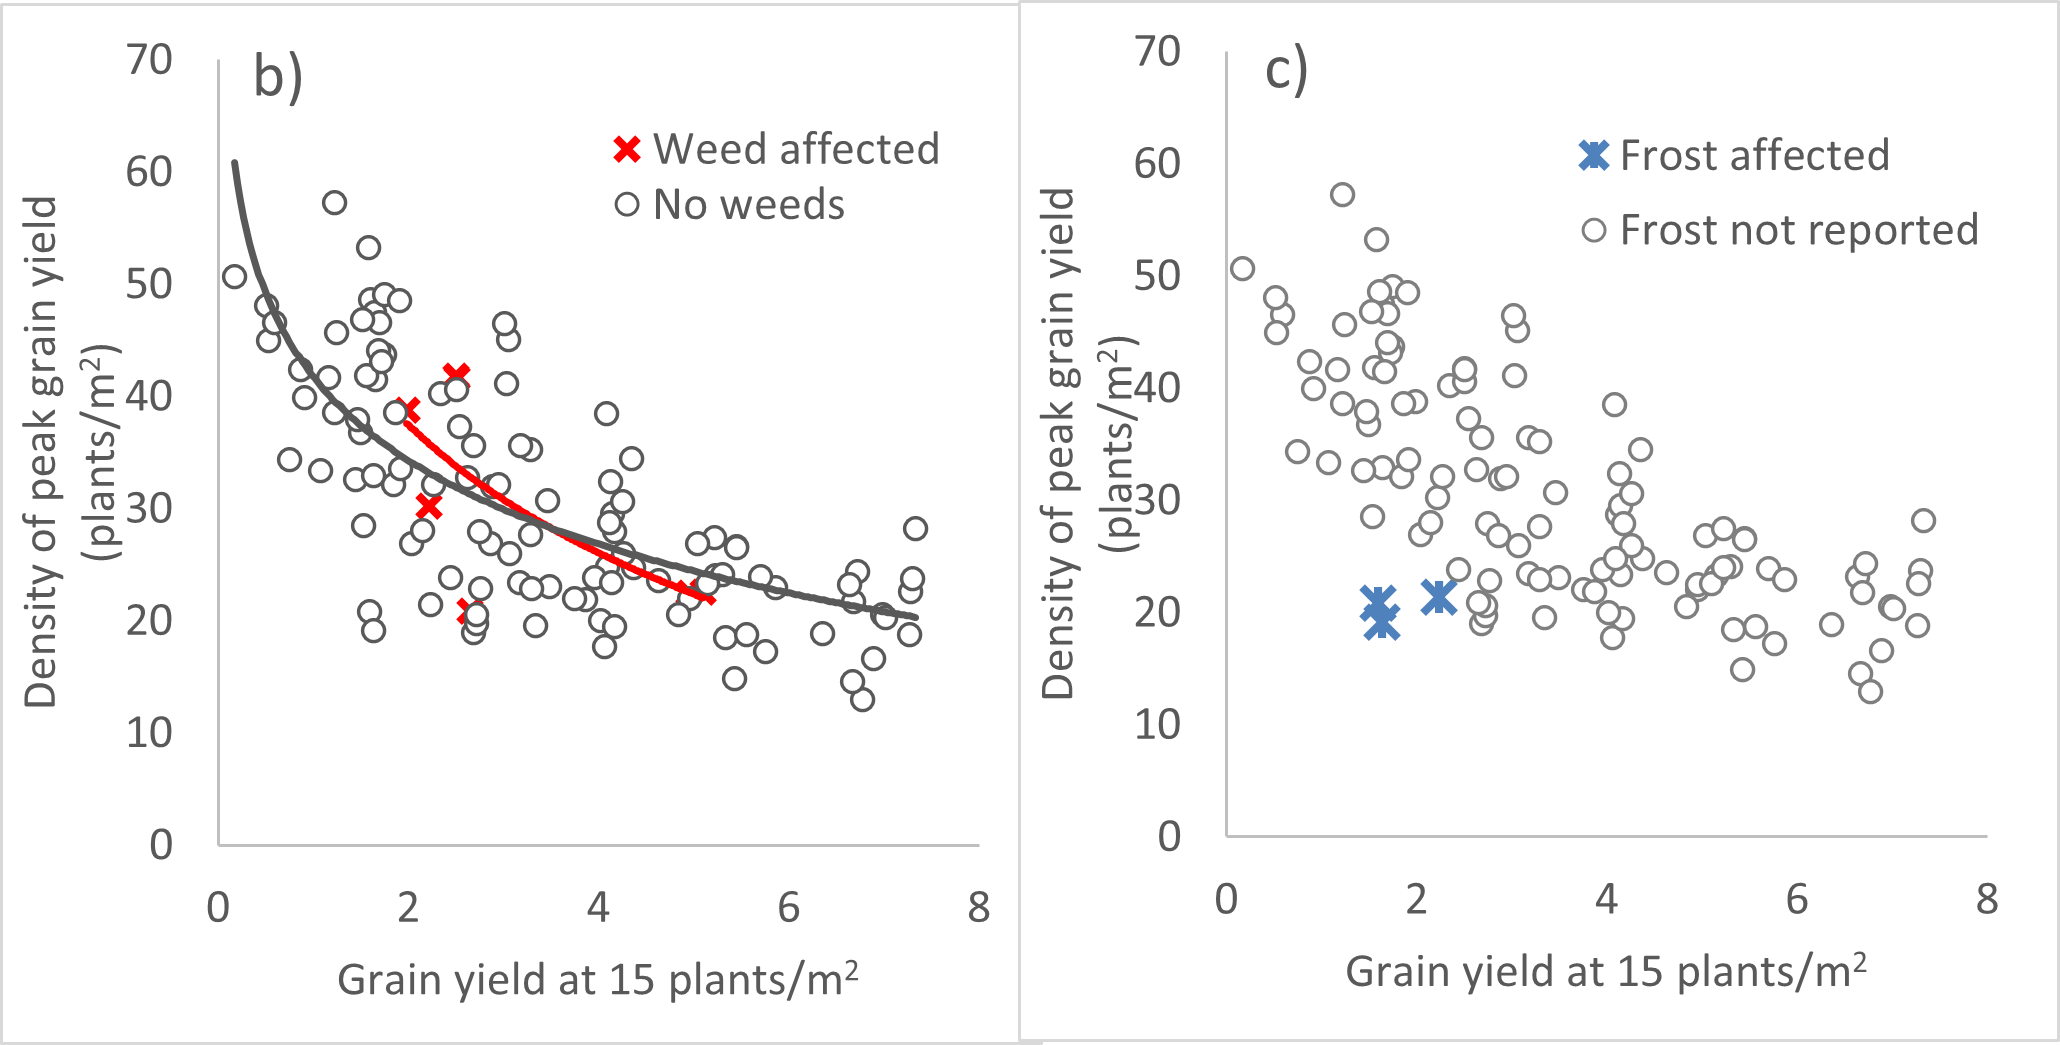 The plant density required to achieve 95% of maximum grain yield as a function of grain yield at 15 plants/m2 in experiments a) with or without irrigation, b) with or without weeds reported, and c) with or without frost reported. 